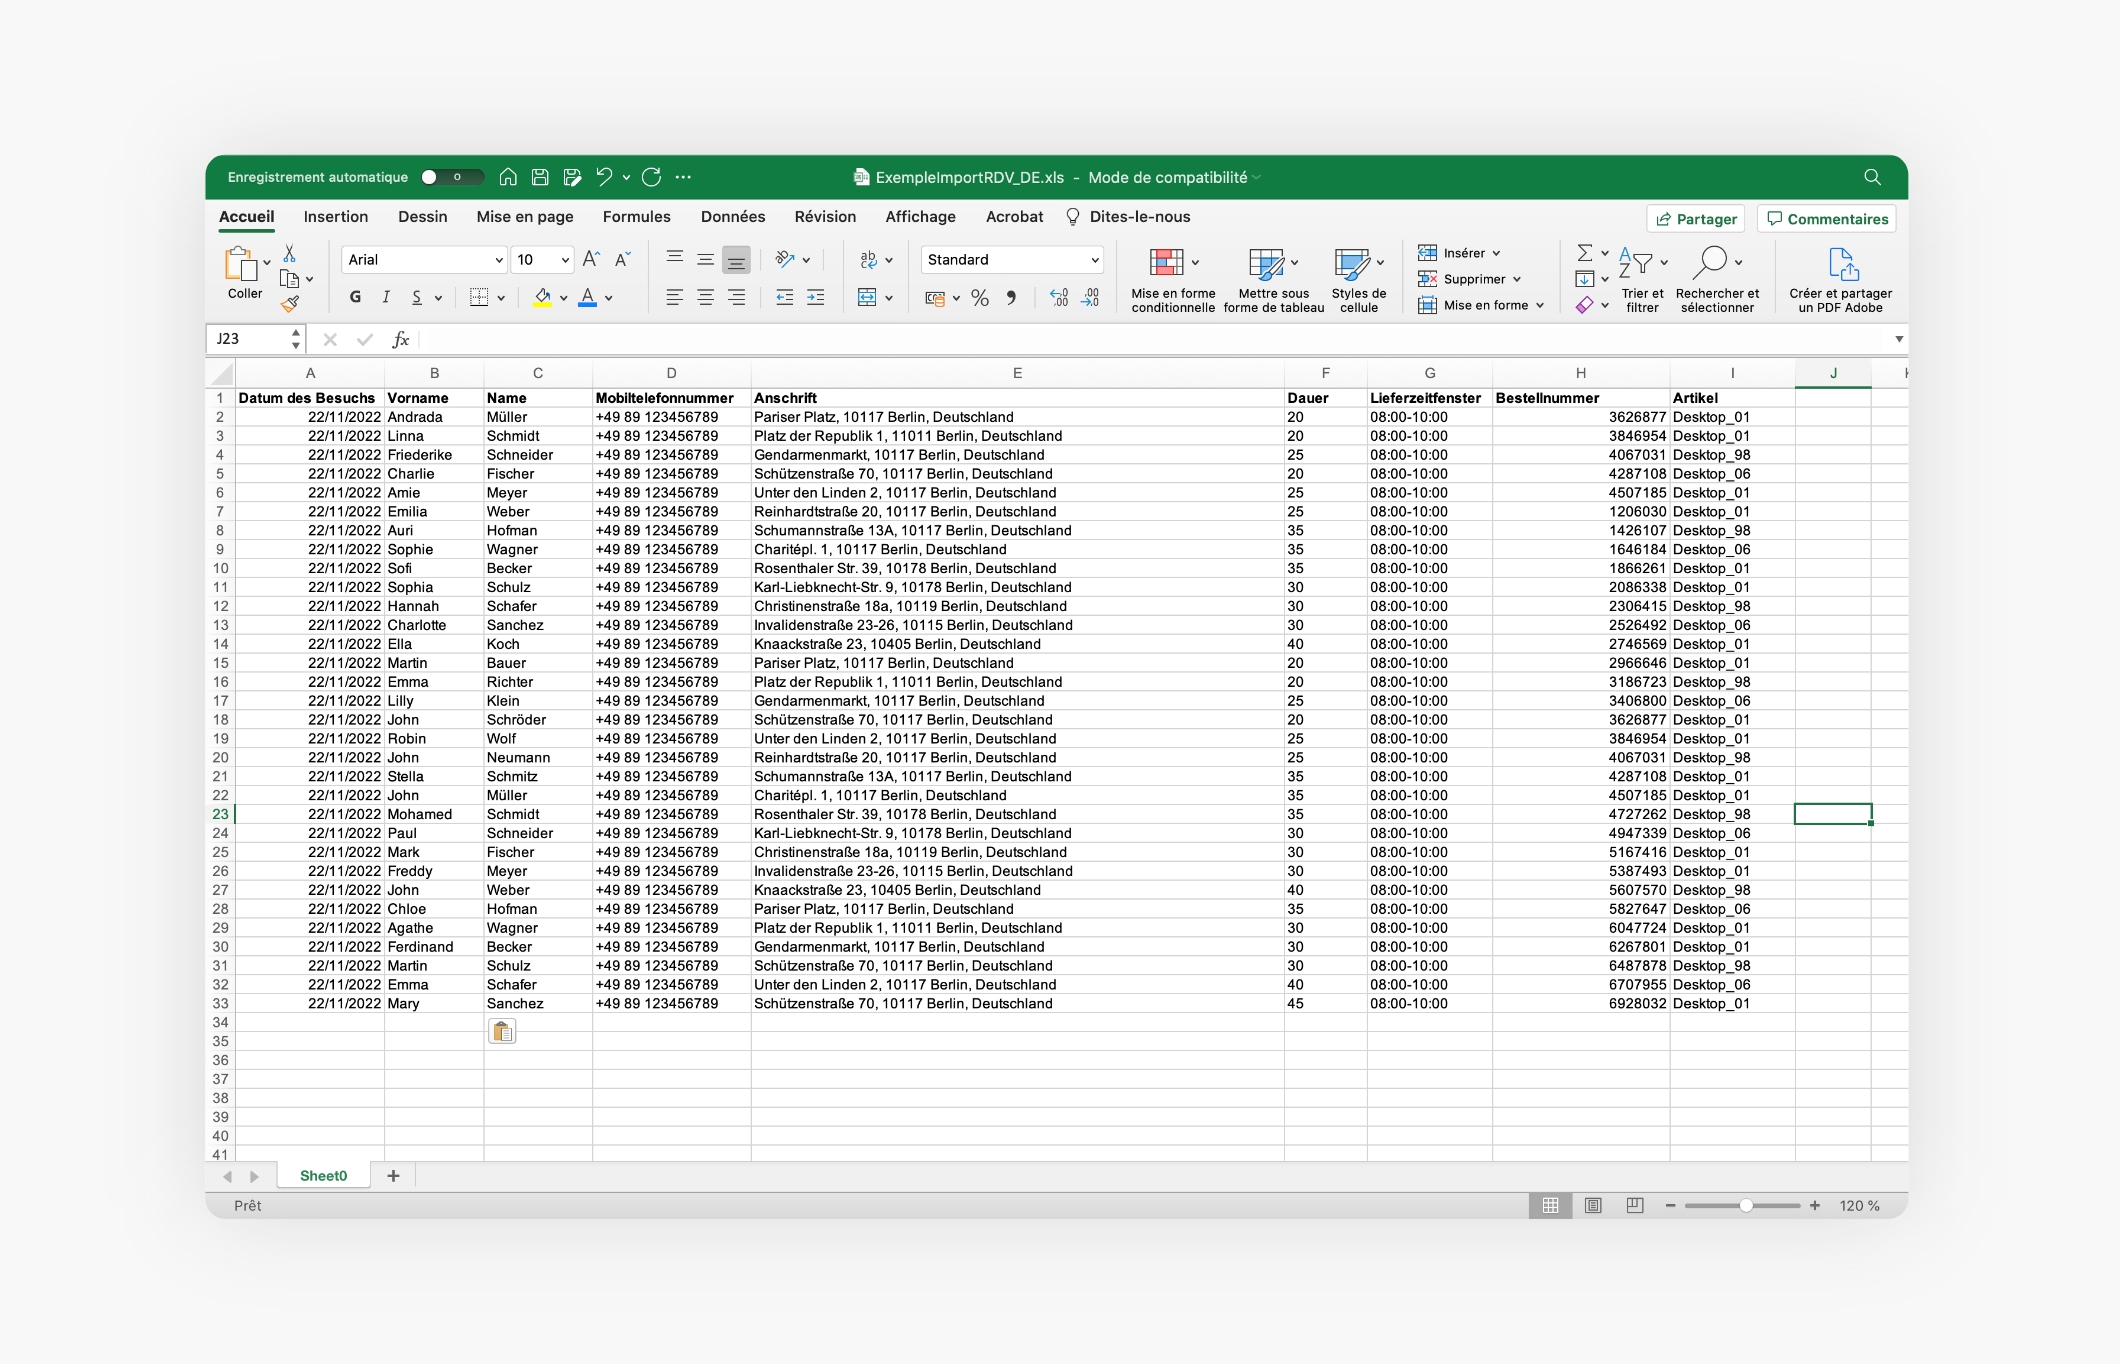 Excel file with a list of work orders